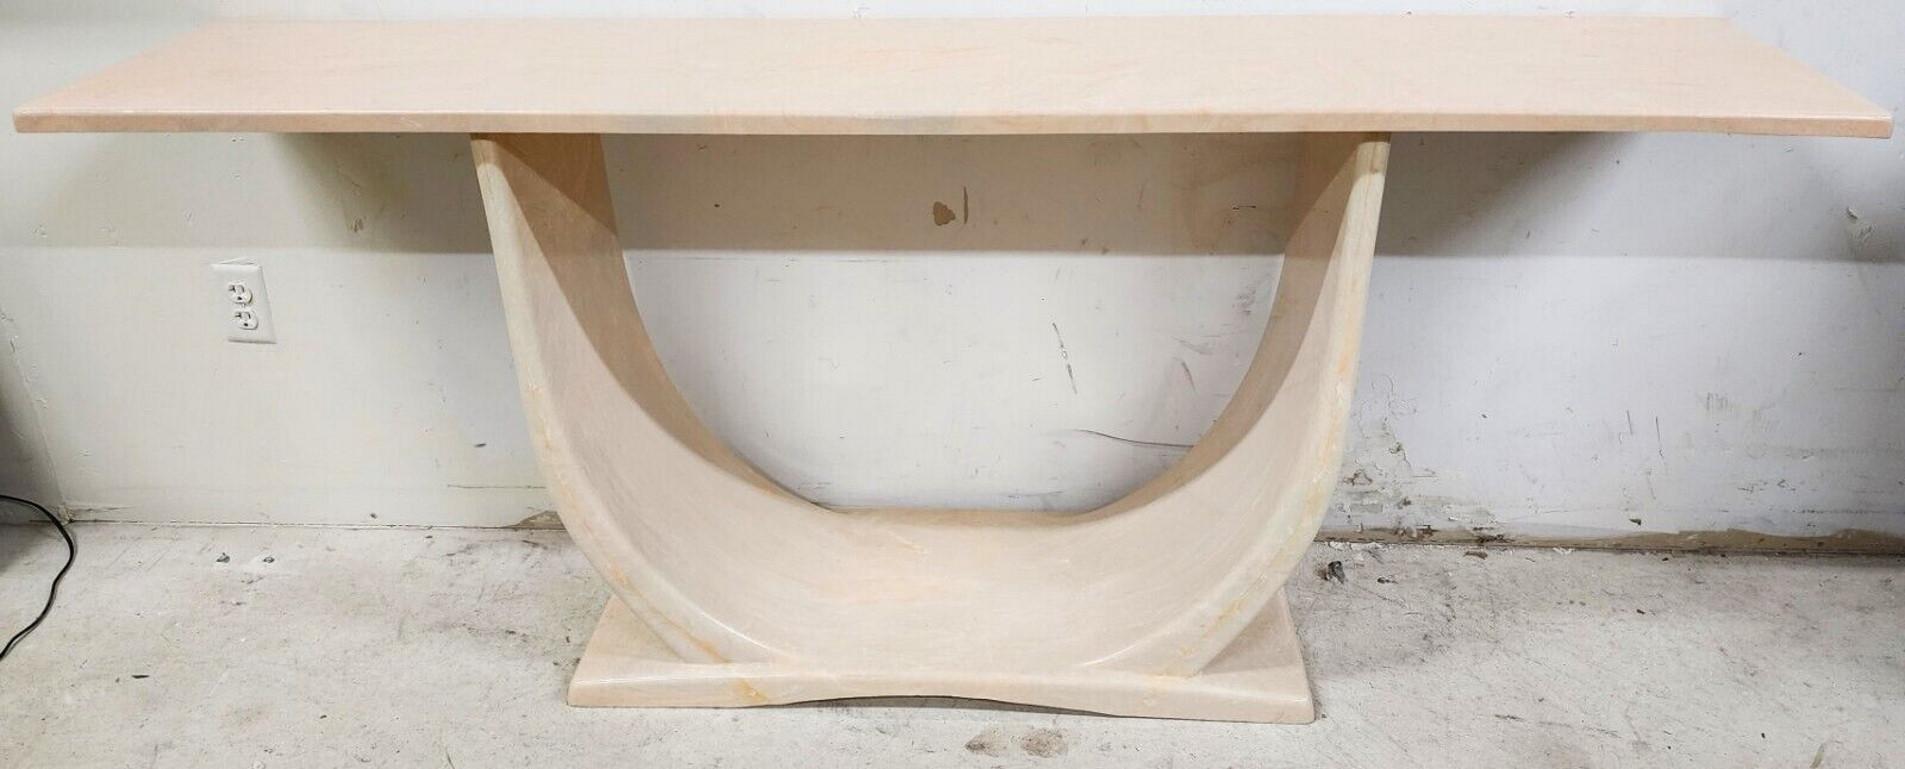 Offering one of our recent palm beach estate fine furniture acquisitions of a 
Karl Springer Style Sculptural Polyresin Console Sofa Table
Very well made and heavy piece of fine furniture.
Polyresin is the same thing they make bowling balls out of